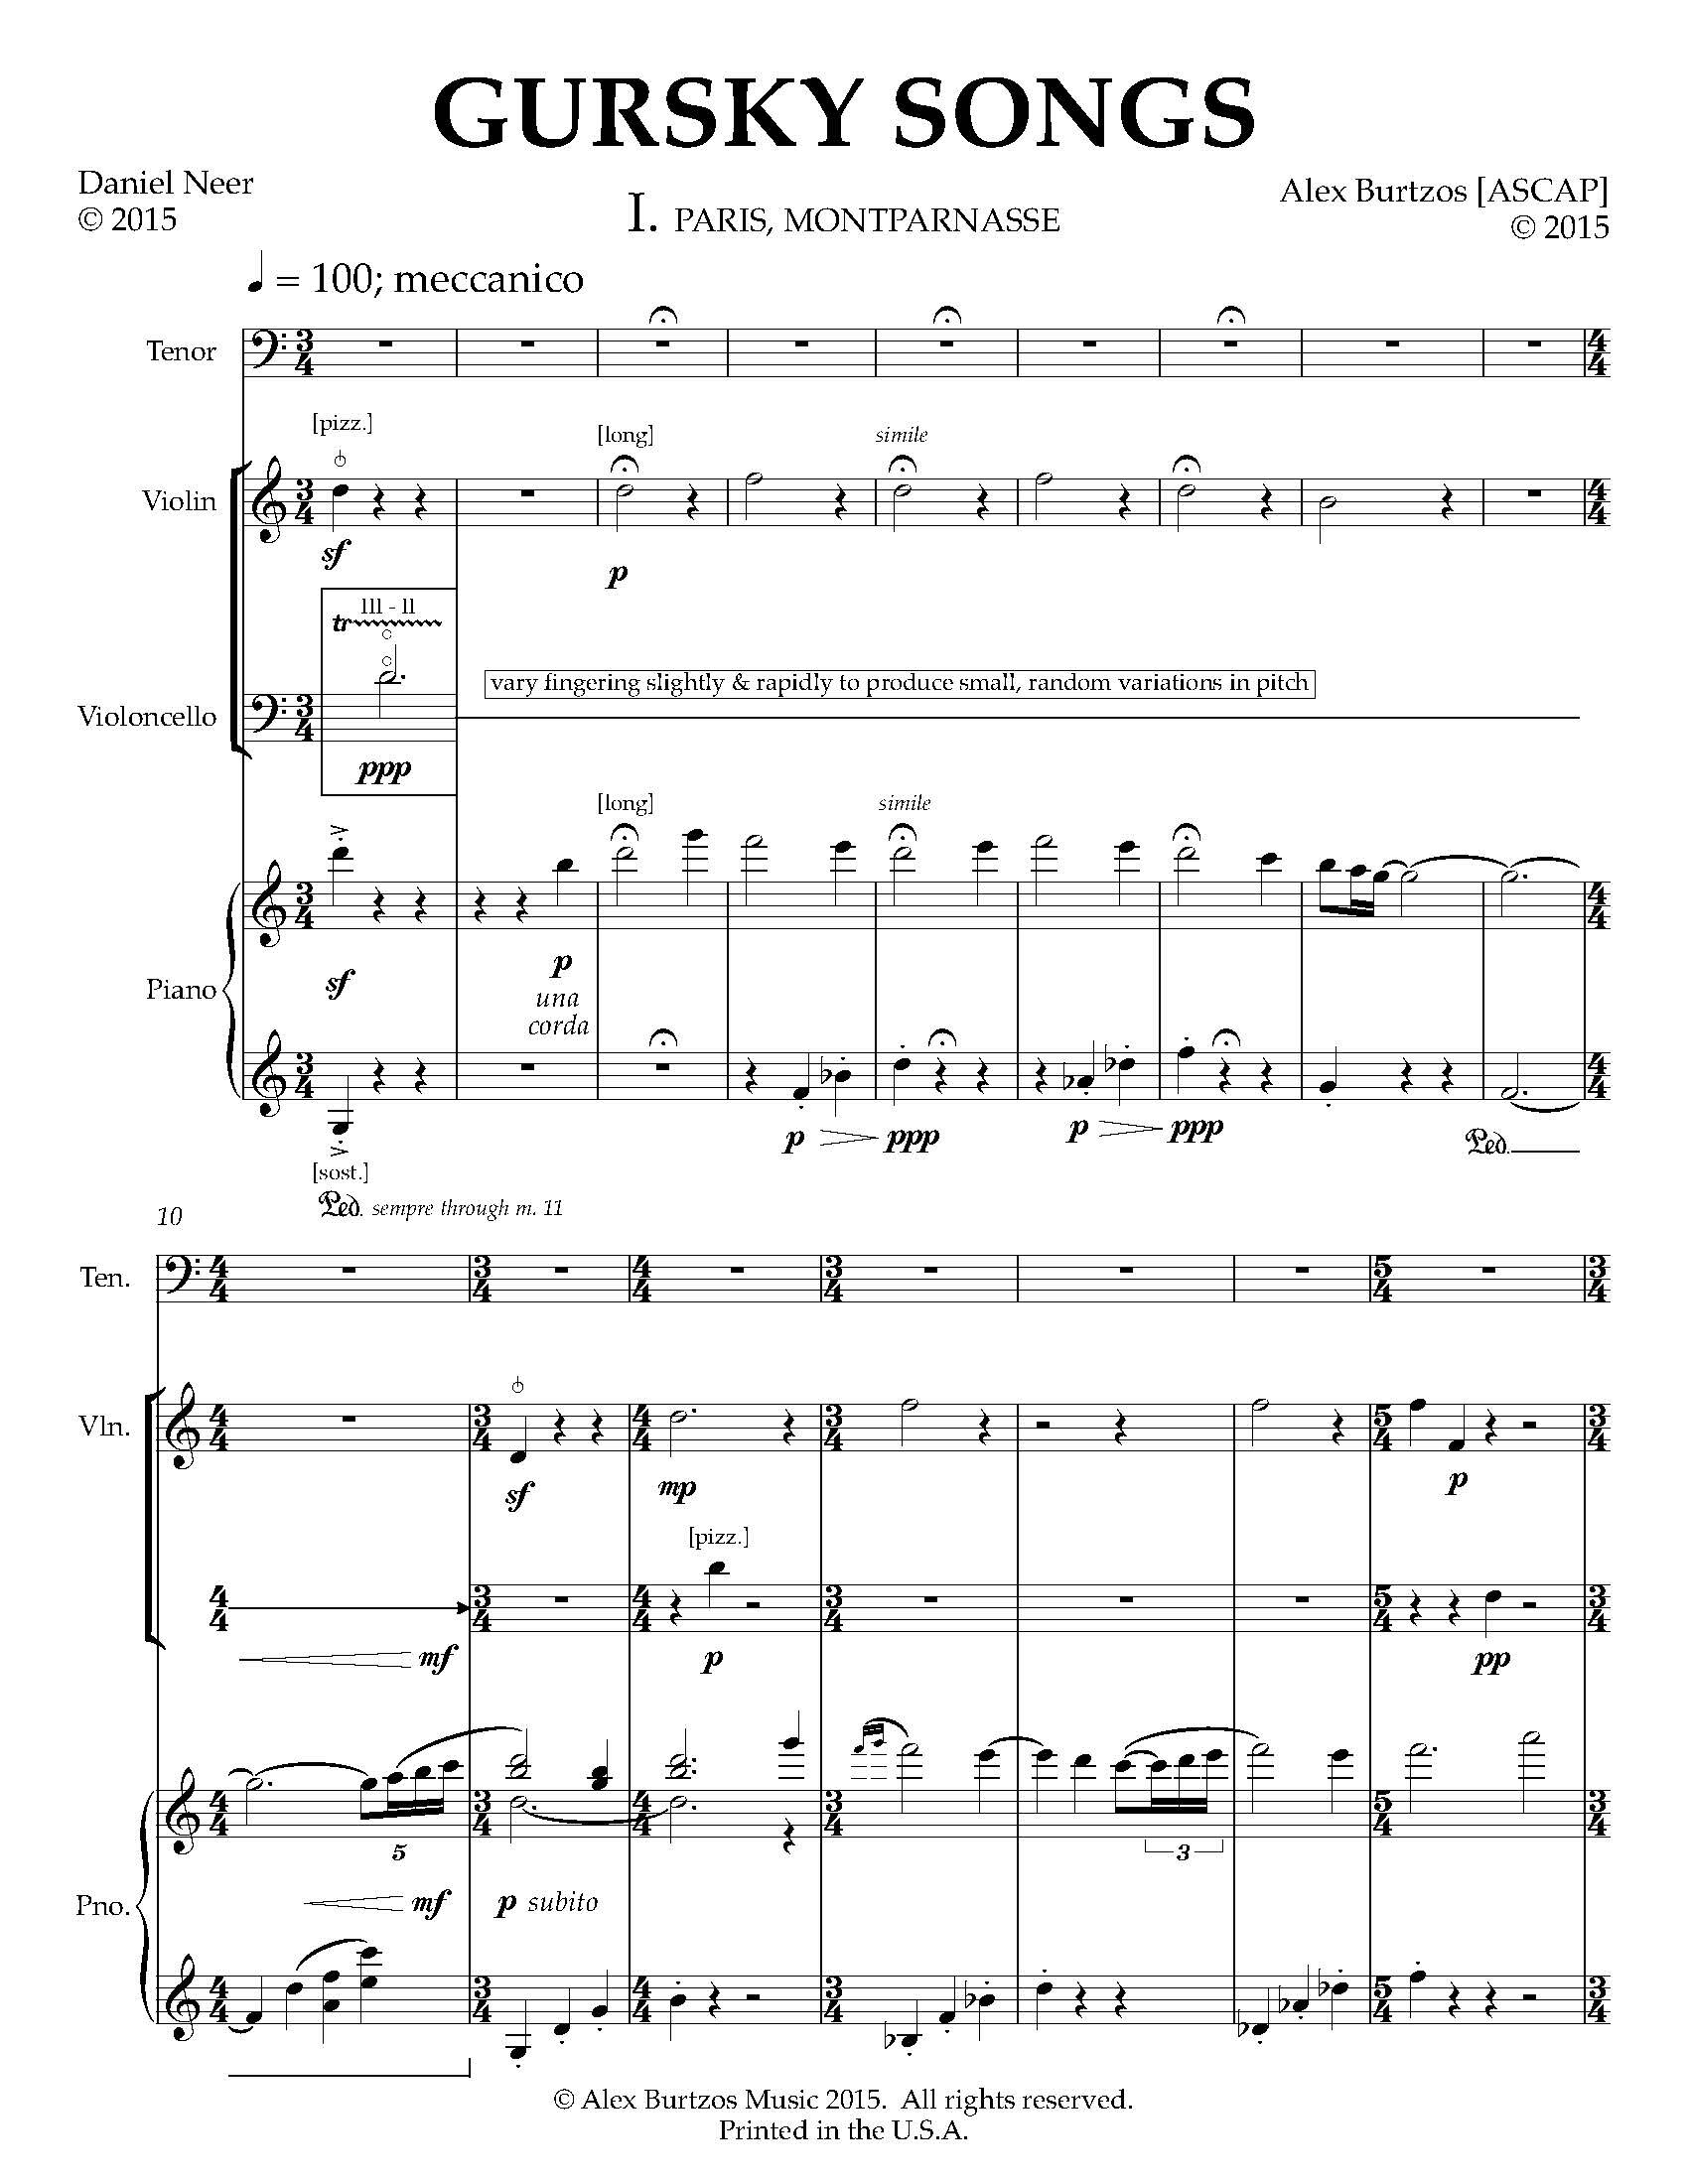 Gursky Songs - Complete Score_Page_09.jpg